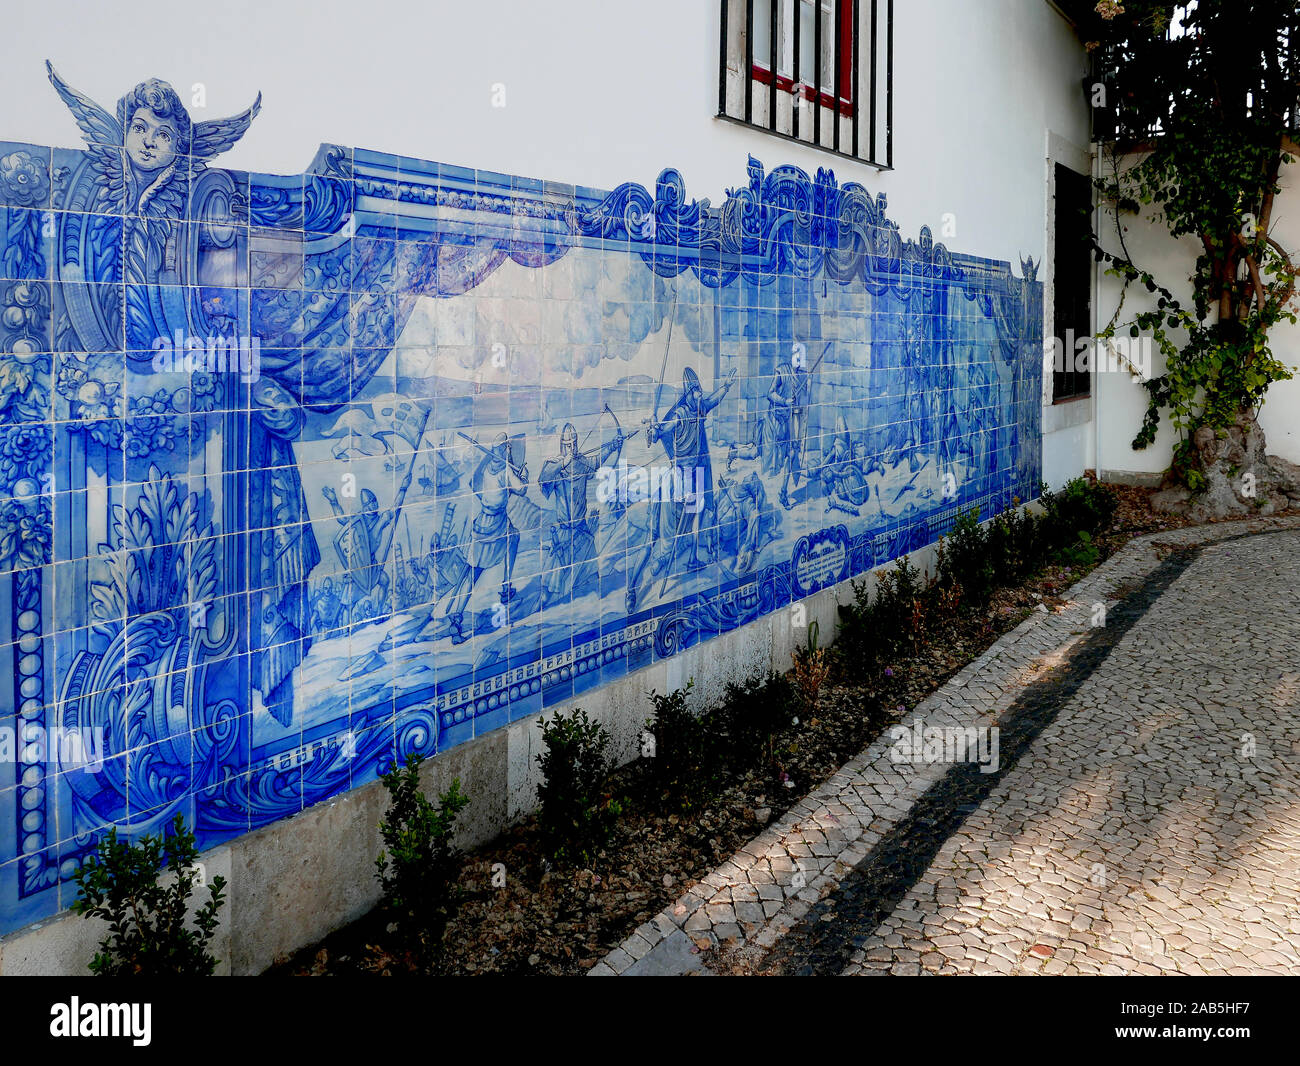 Blue and white ceramic tile mural on the Church of Sante Luzia in Lisbon, Portugal depicting a battle scene of the fall of Lisbon Stock Photo